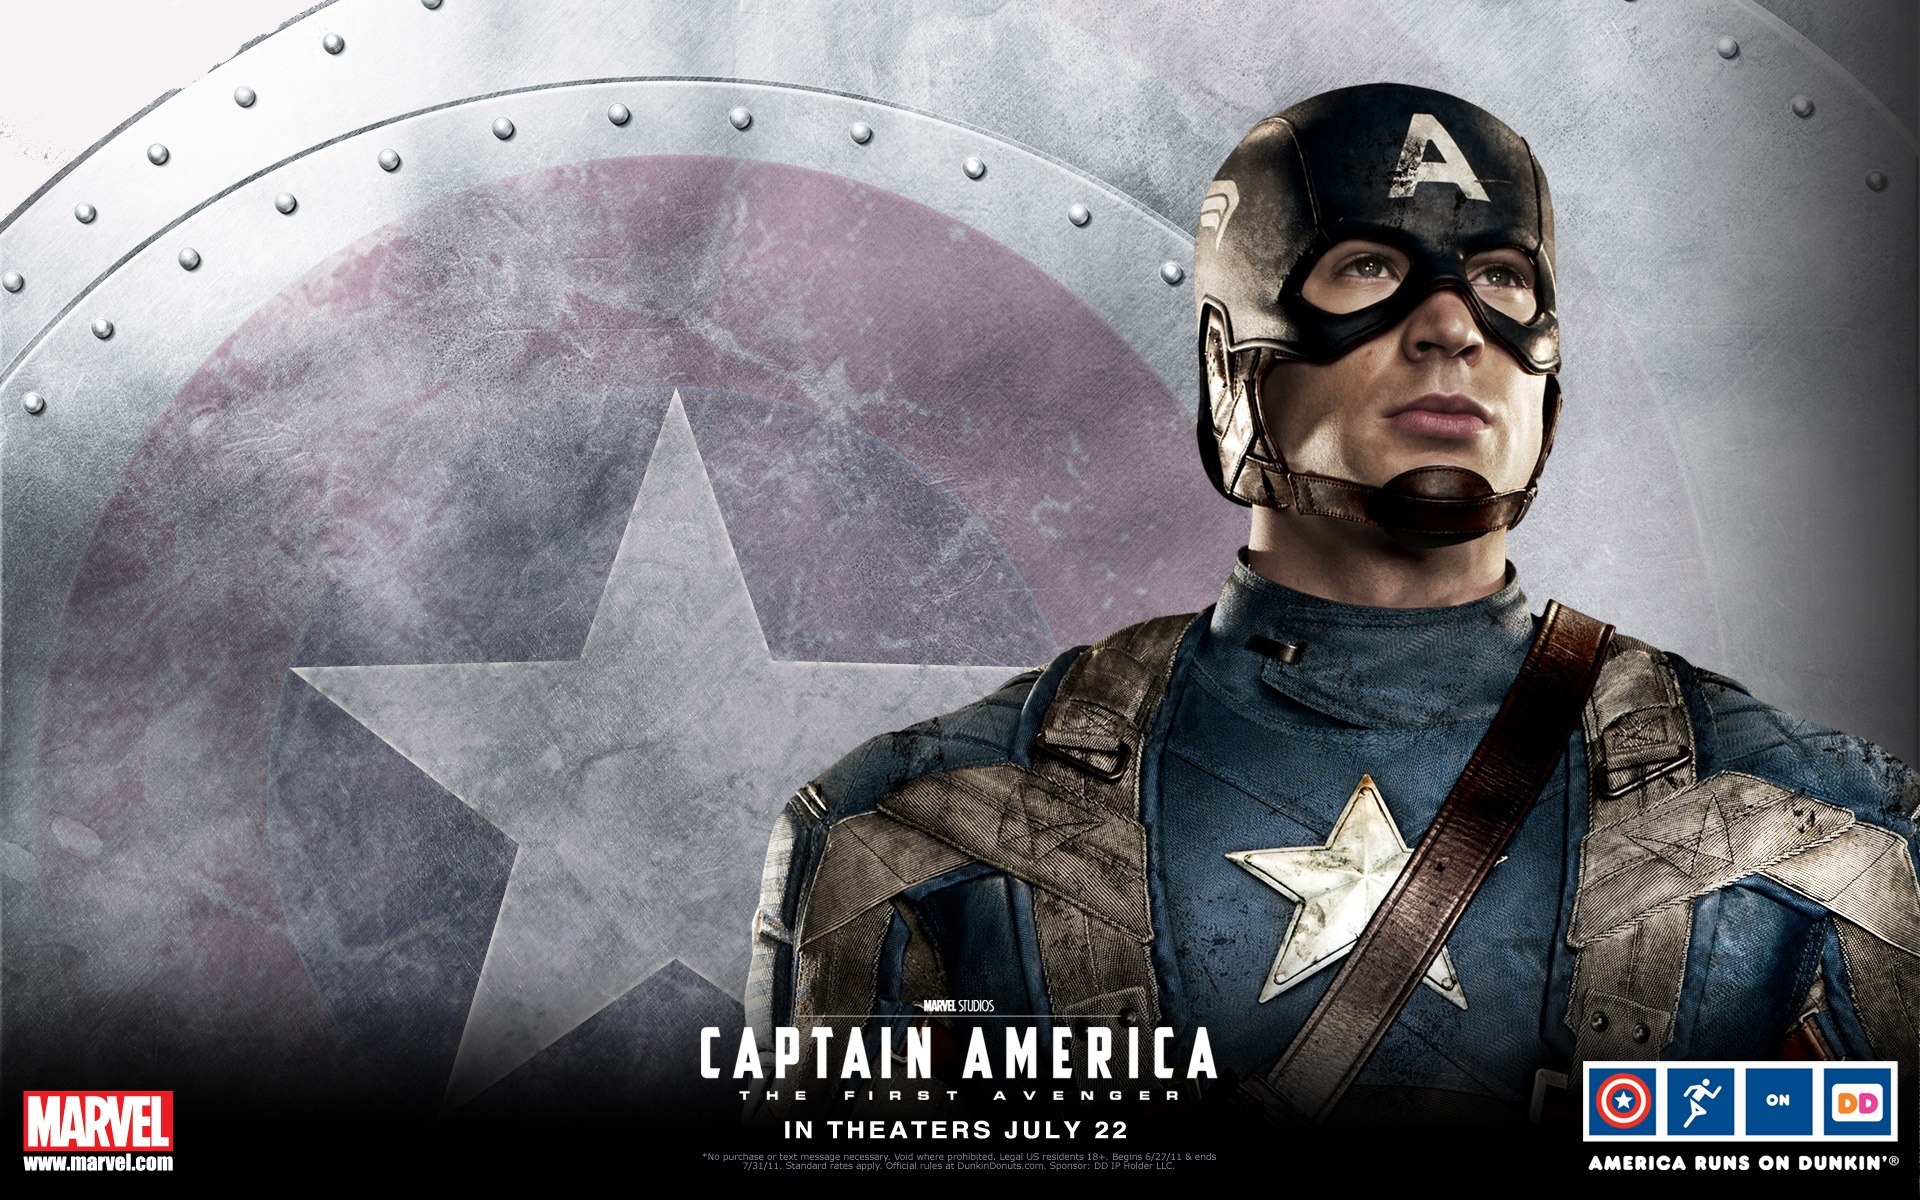 Captain America: The First Avenger wallpapers HD #5 - 1920x1200